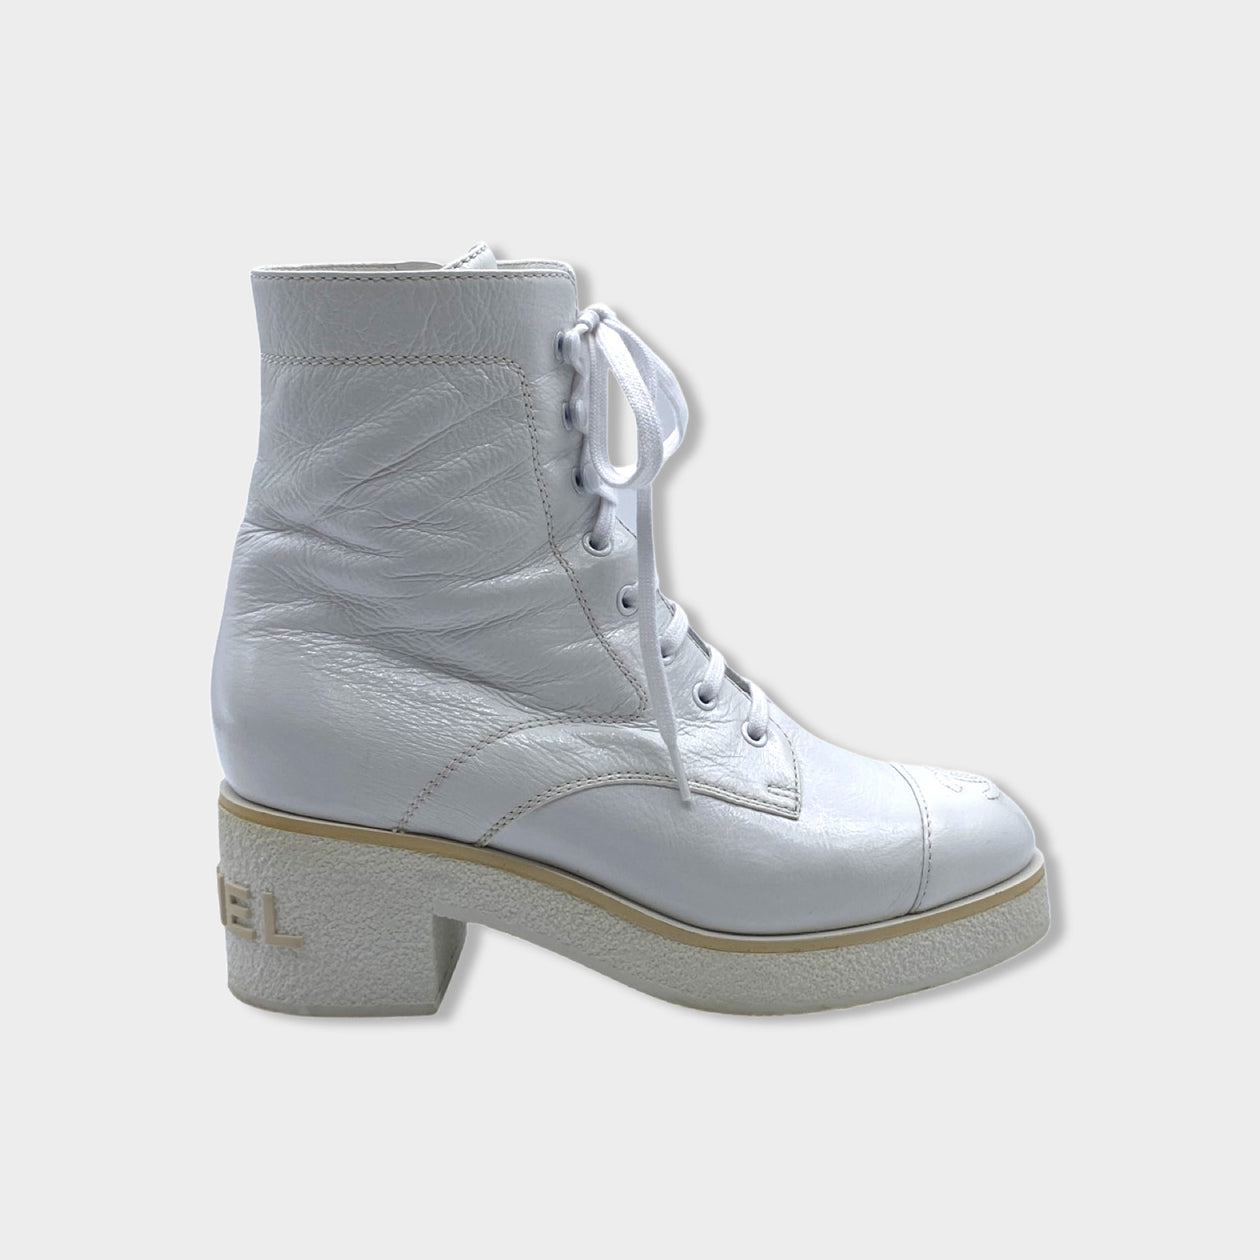 Chanel - Authenticated Boots - Leather White for Women, Very Good Condition